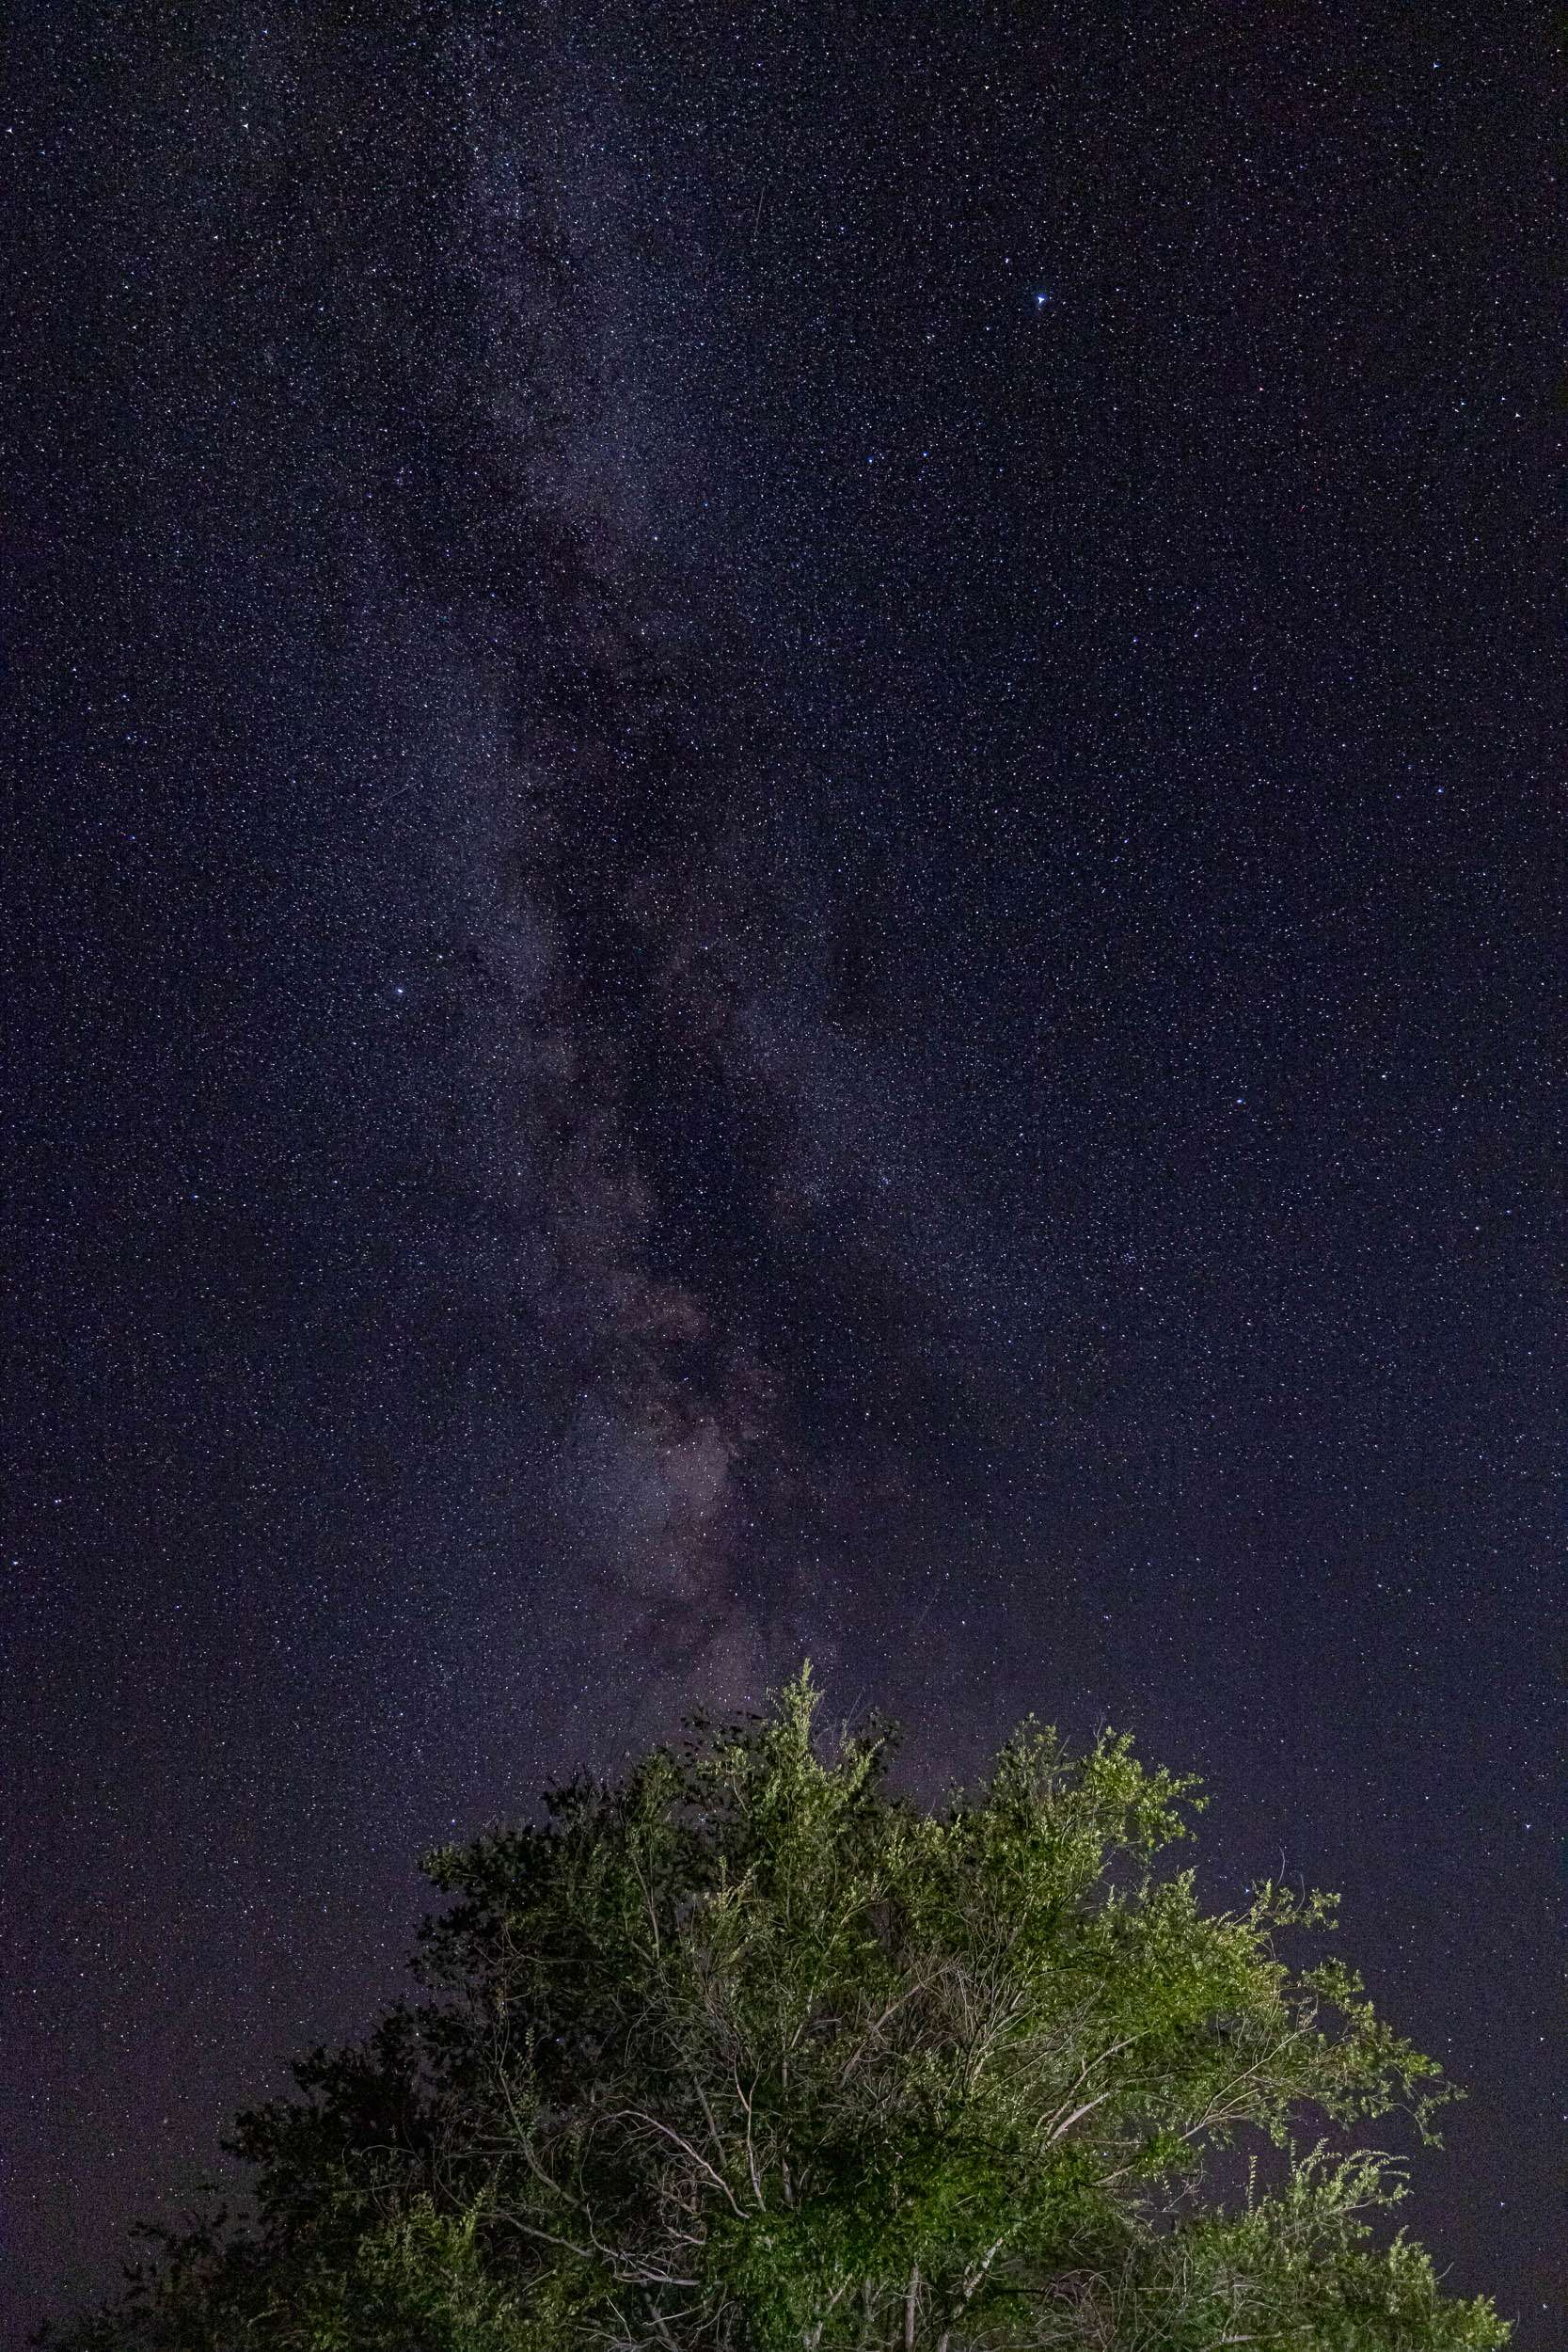 The Milky Way shining over a tree